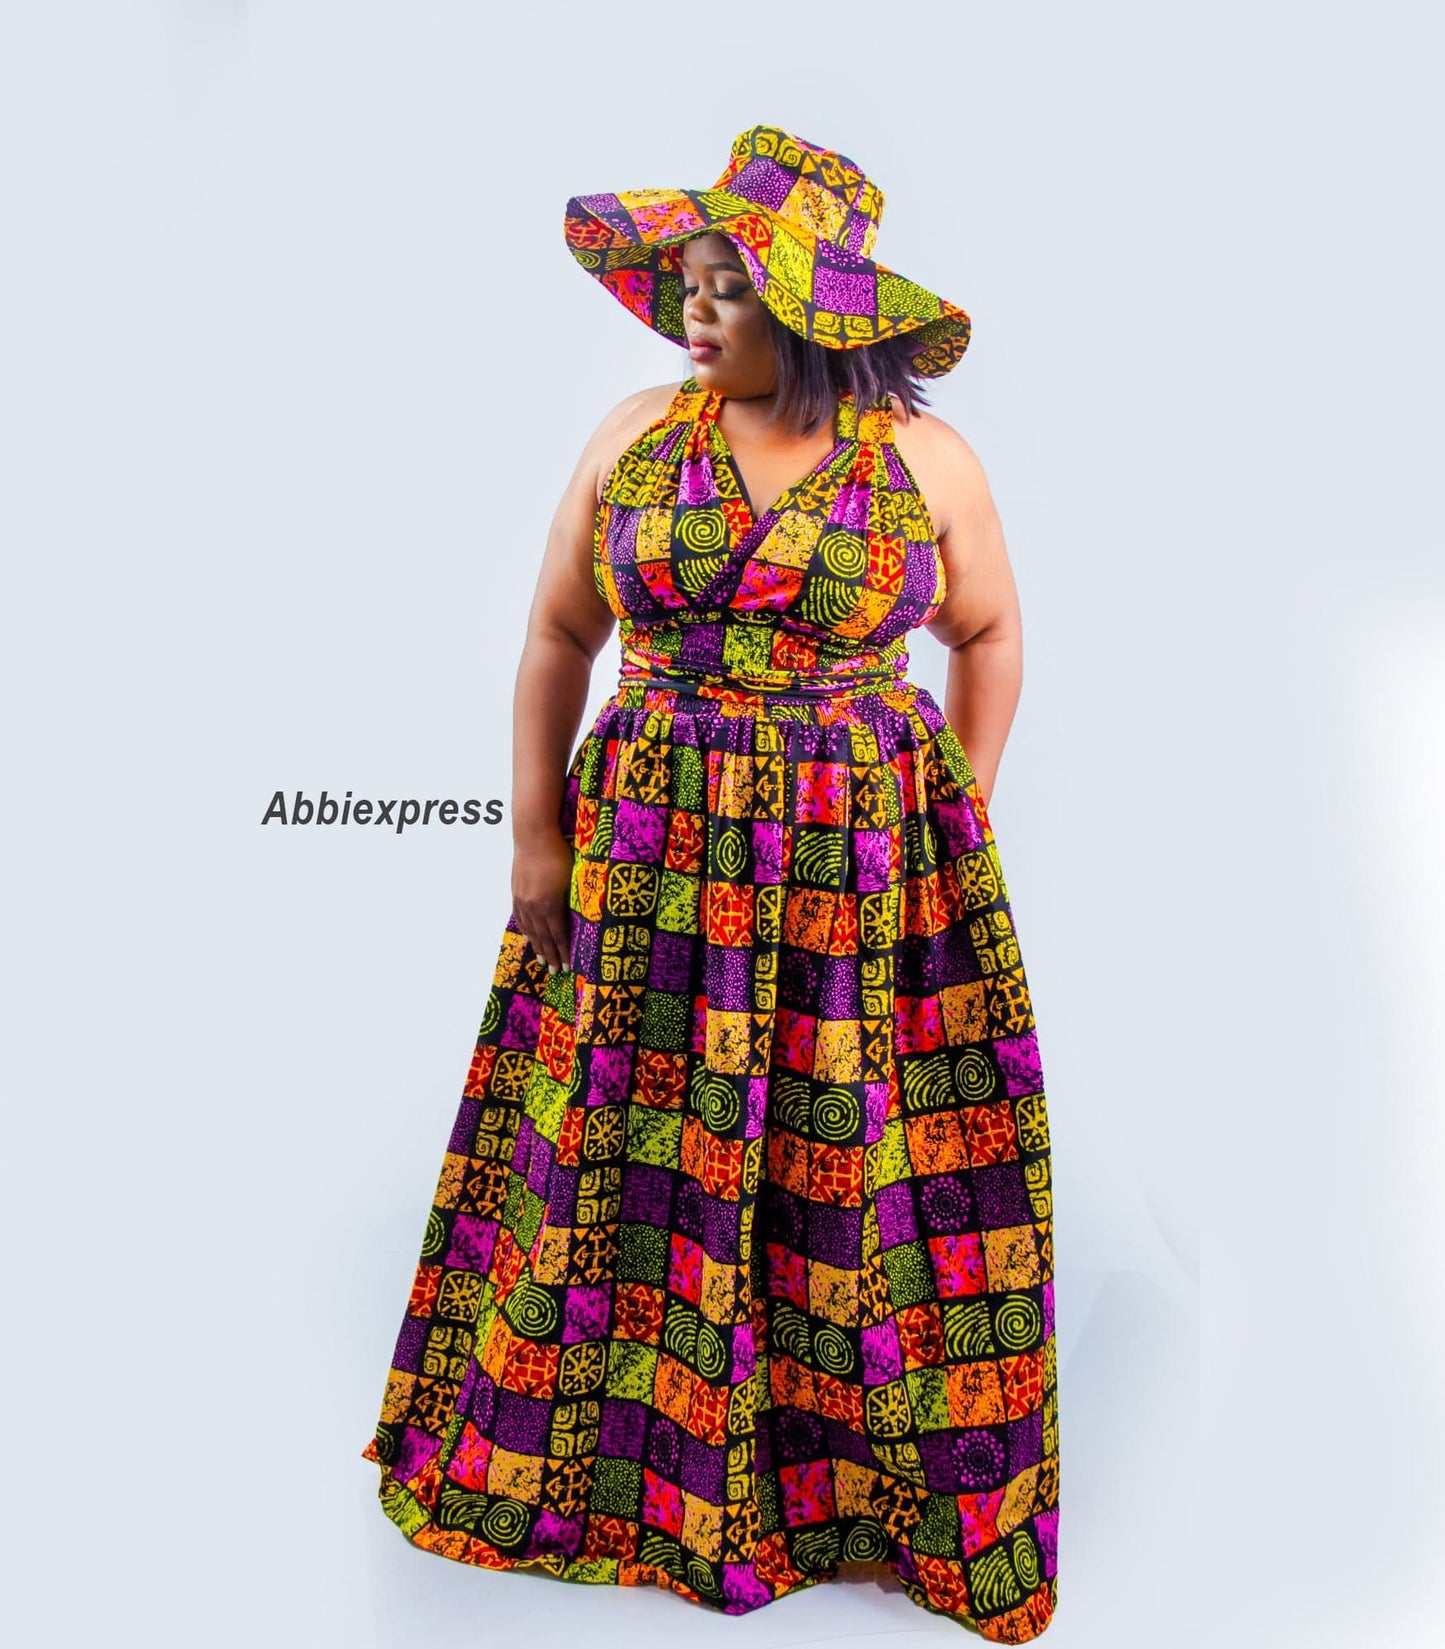 Abbiexpress AFRICAN WOMEN'S WEAR Multiple color Ankara Maxi dress paired with a matching hat.